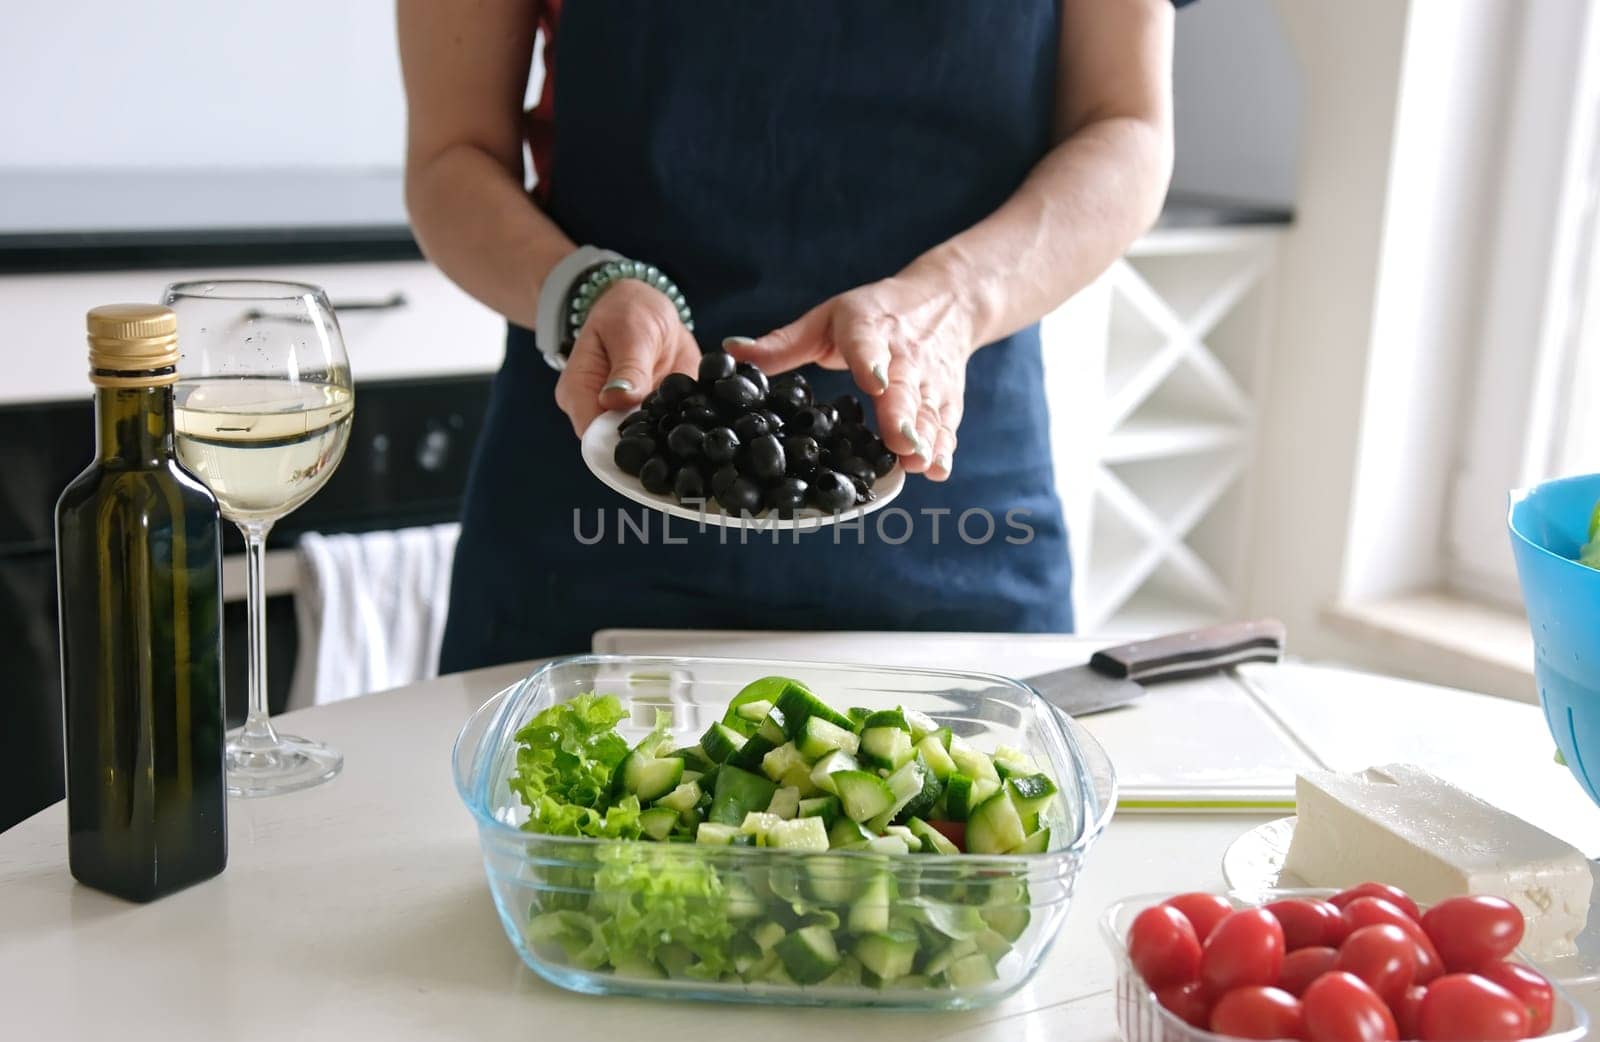 Woman At Home Prepares Greek Salad, Pouring Olives Into Salad Bowl